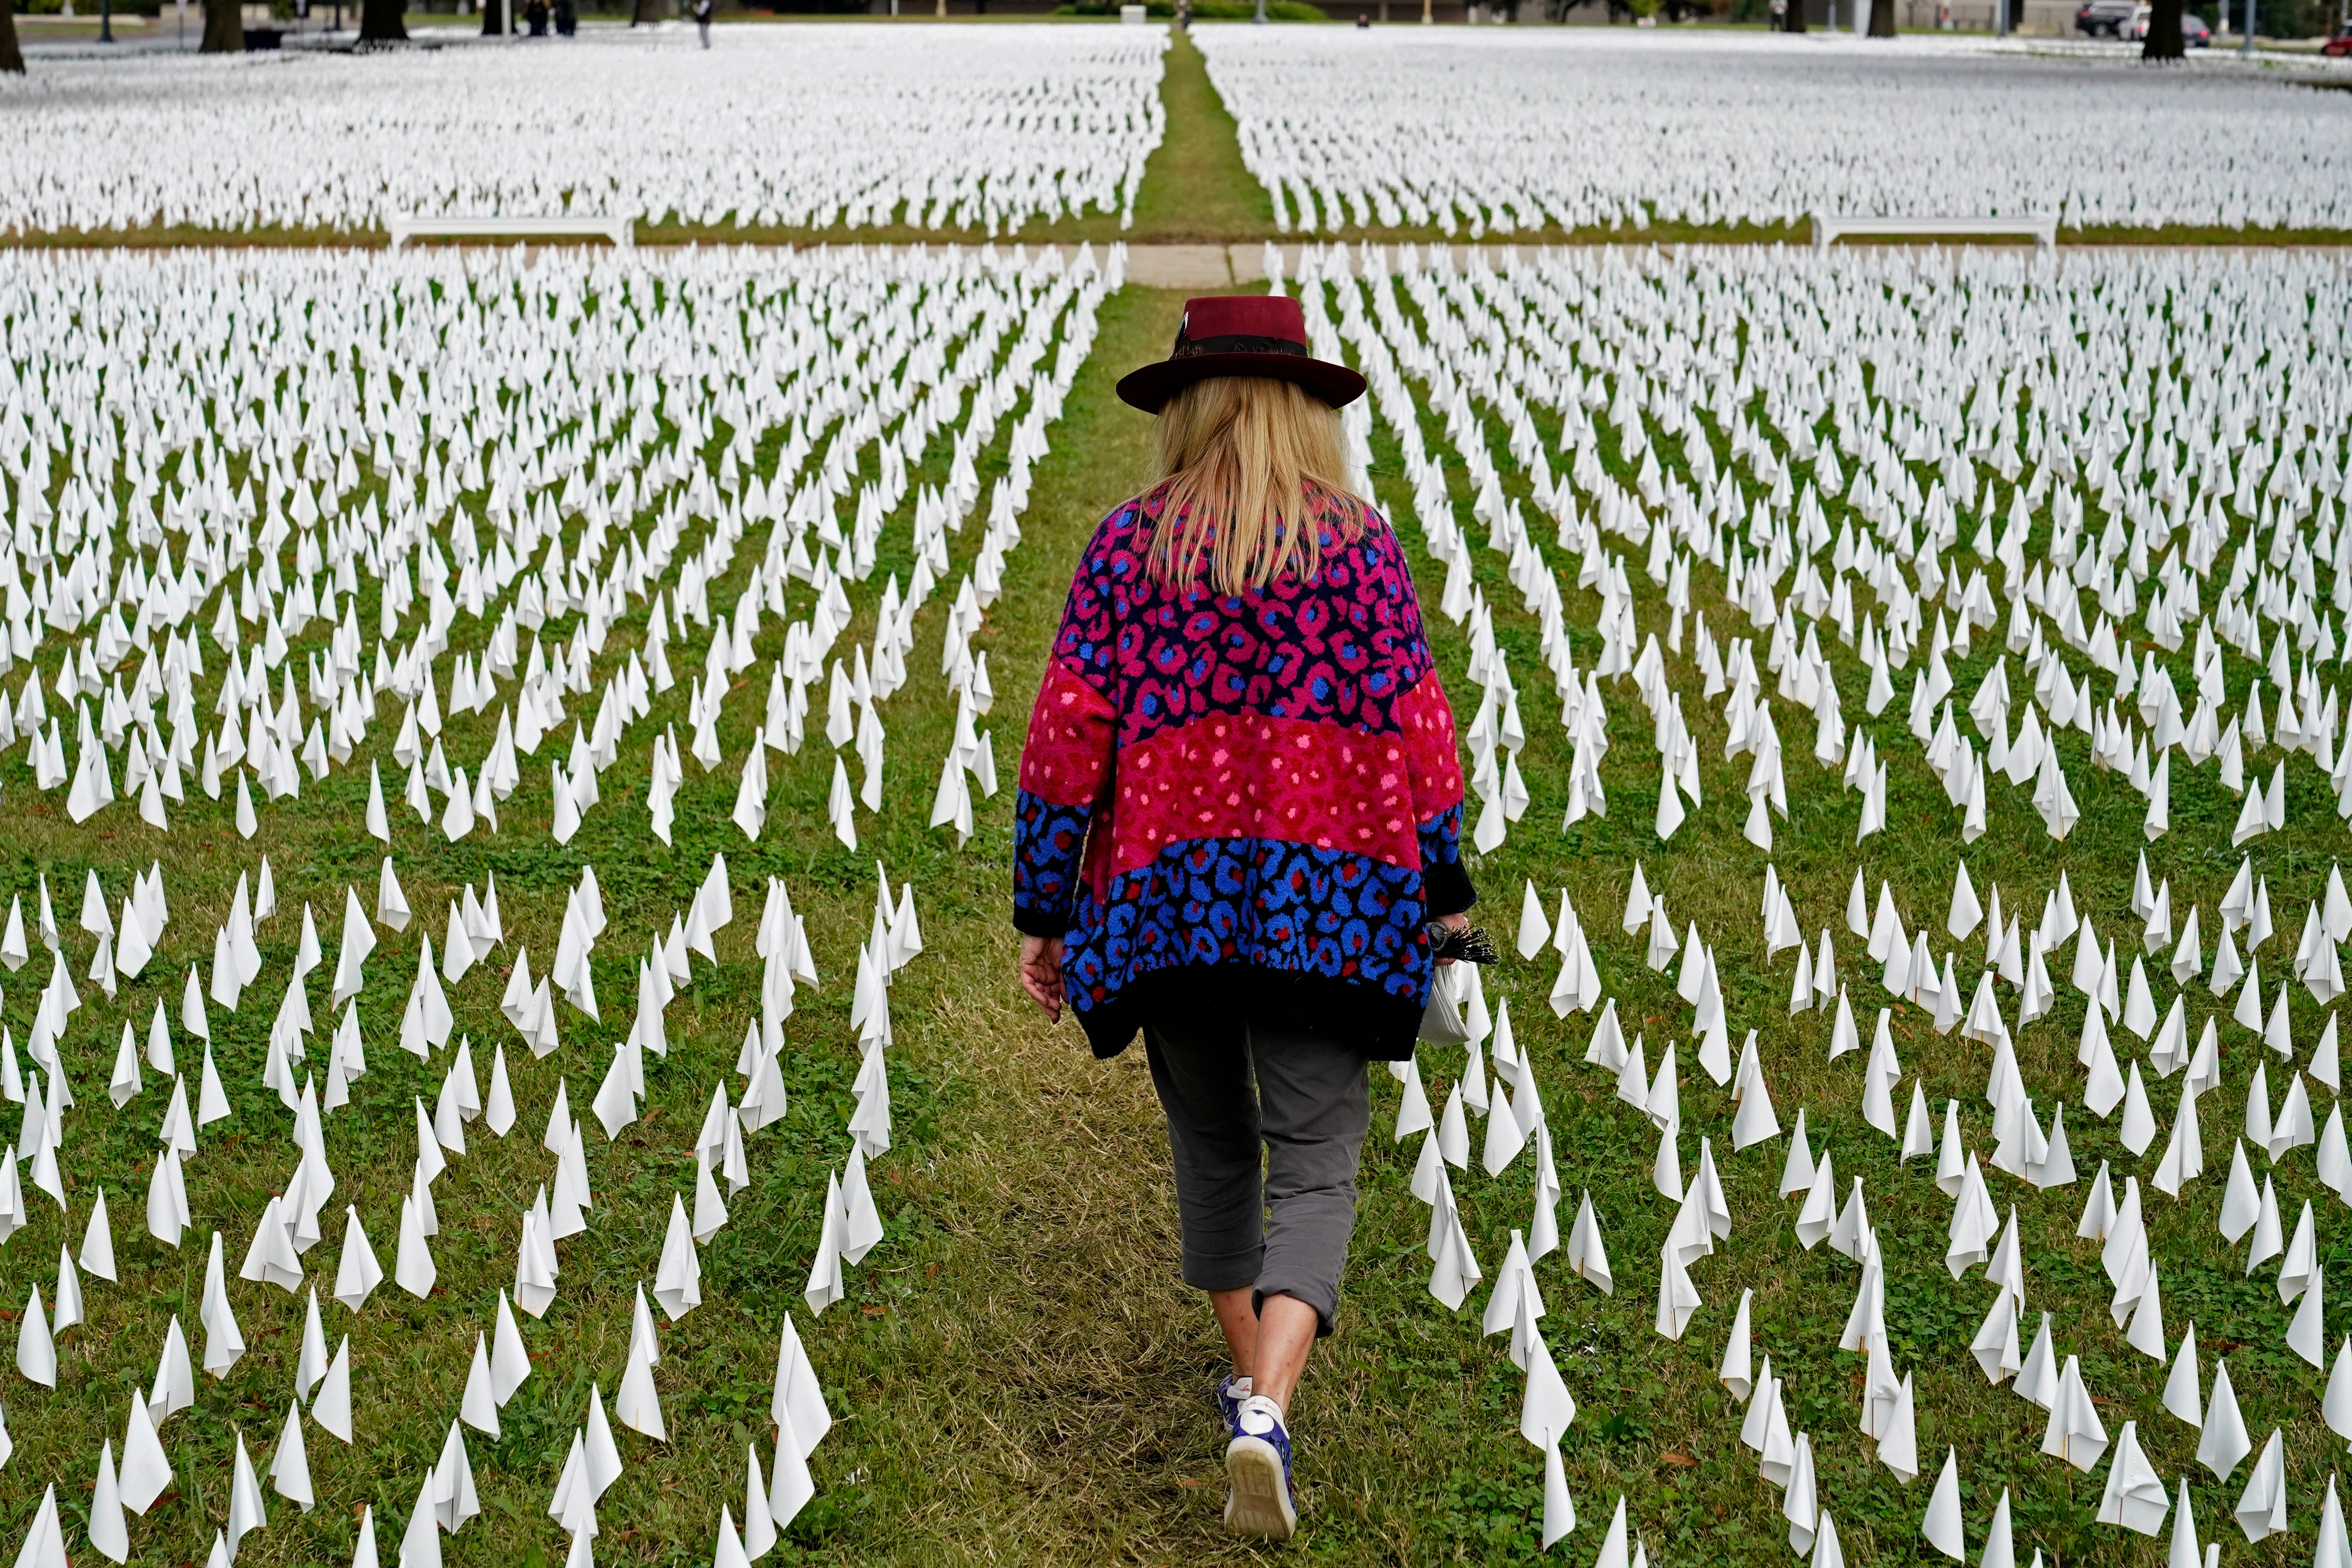 Artist Suzanne Brennan Firstenberg walks among thousands of white flags planted in remembrance of Americans who have died of Covid-19 in Washington DC. The U.S. death toll from the coronavirus topped 300,000 on 14 December as the first doses of a vaccine became available.